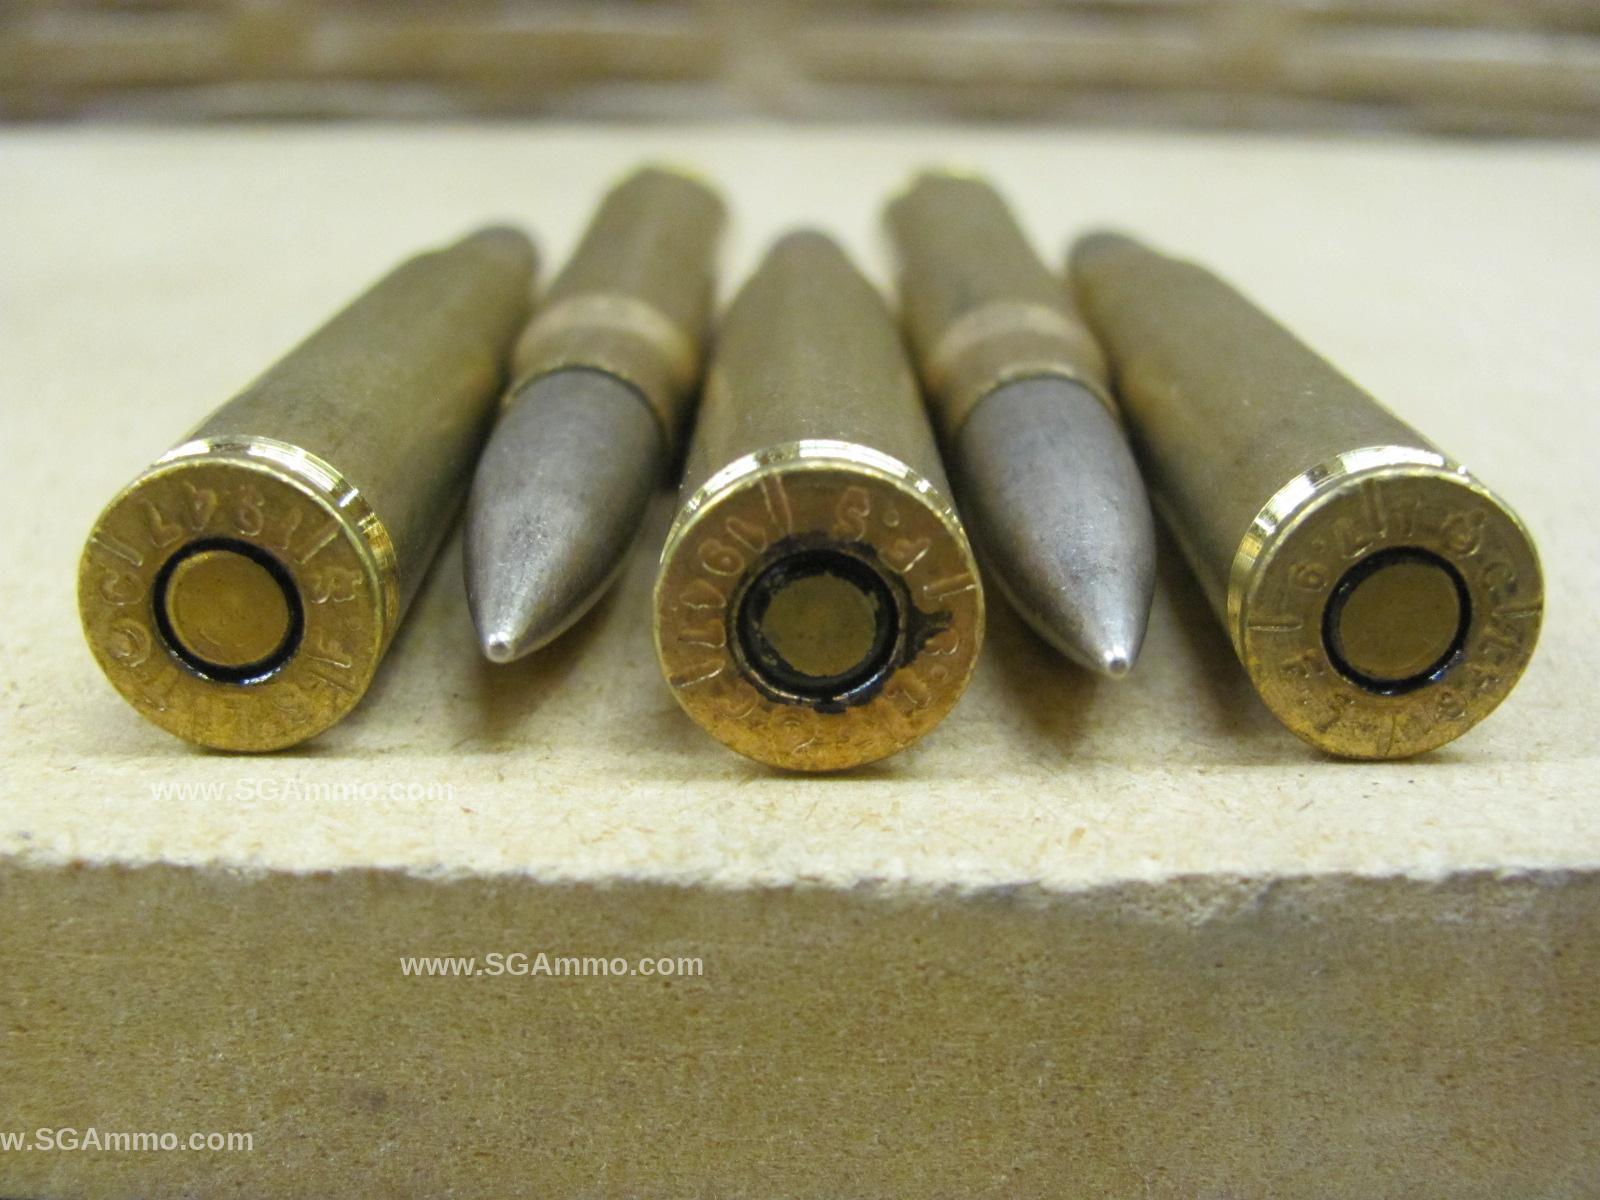 140 Round Pack - 8mm Mauser 155 Grain FMJ Turkish Surplus Ammo on Stripper Clips and Bandoliers 1930s-1950s Era